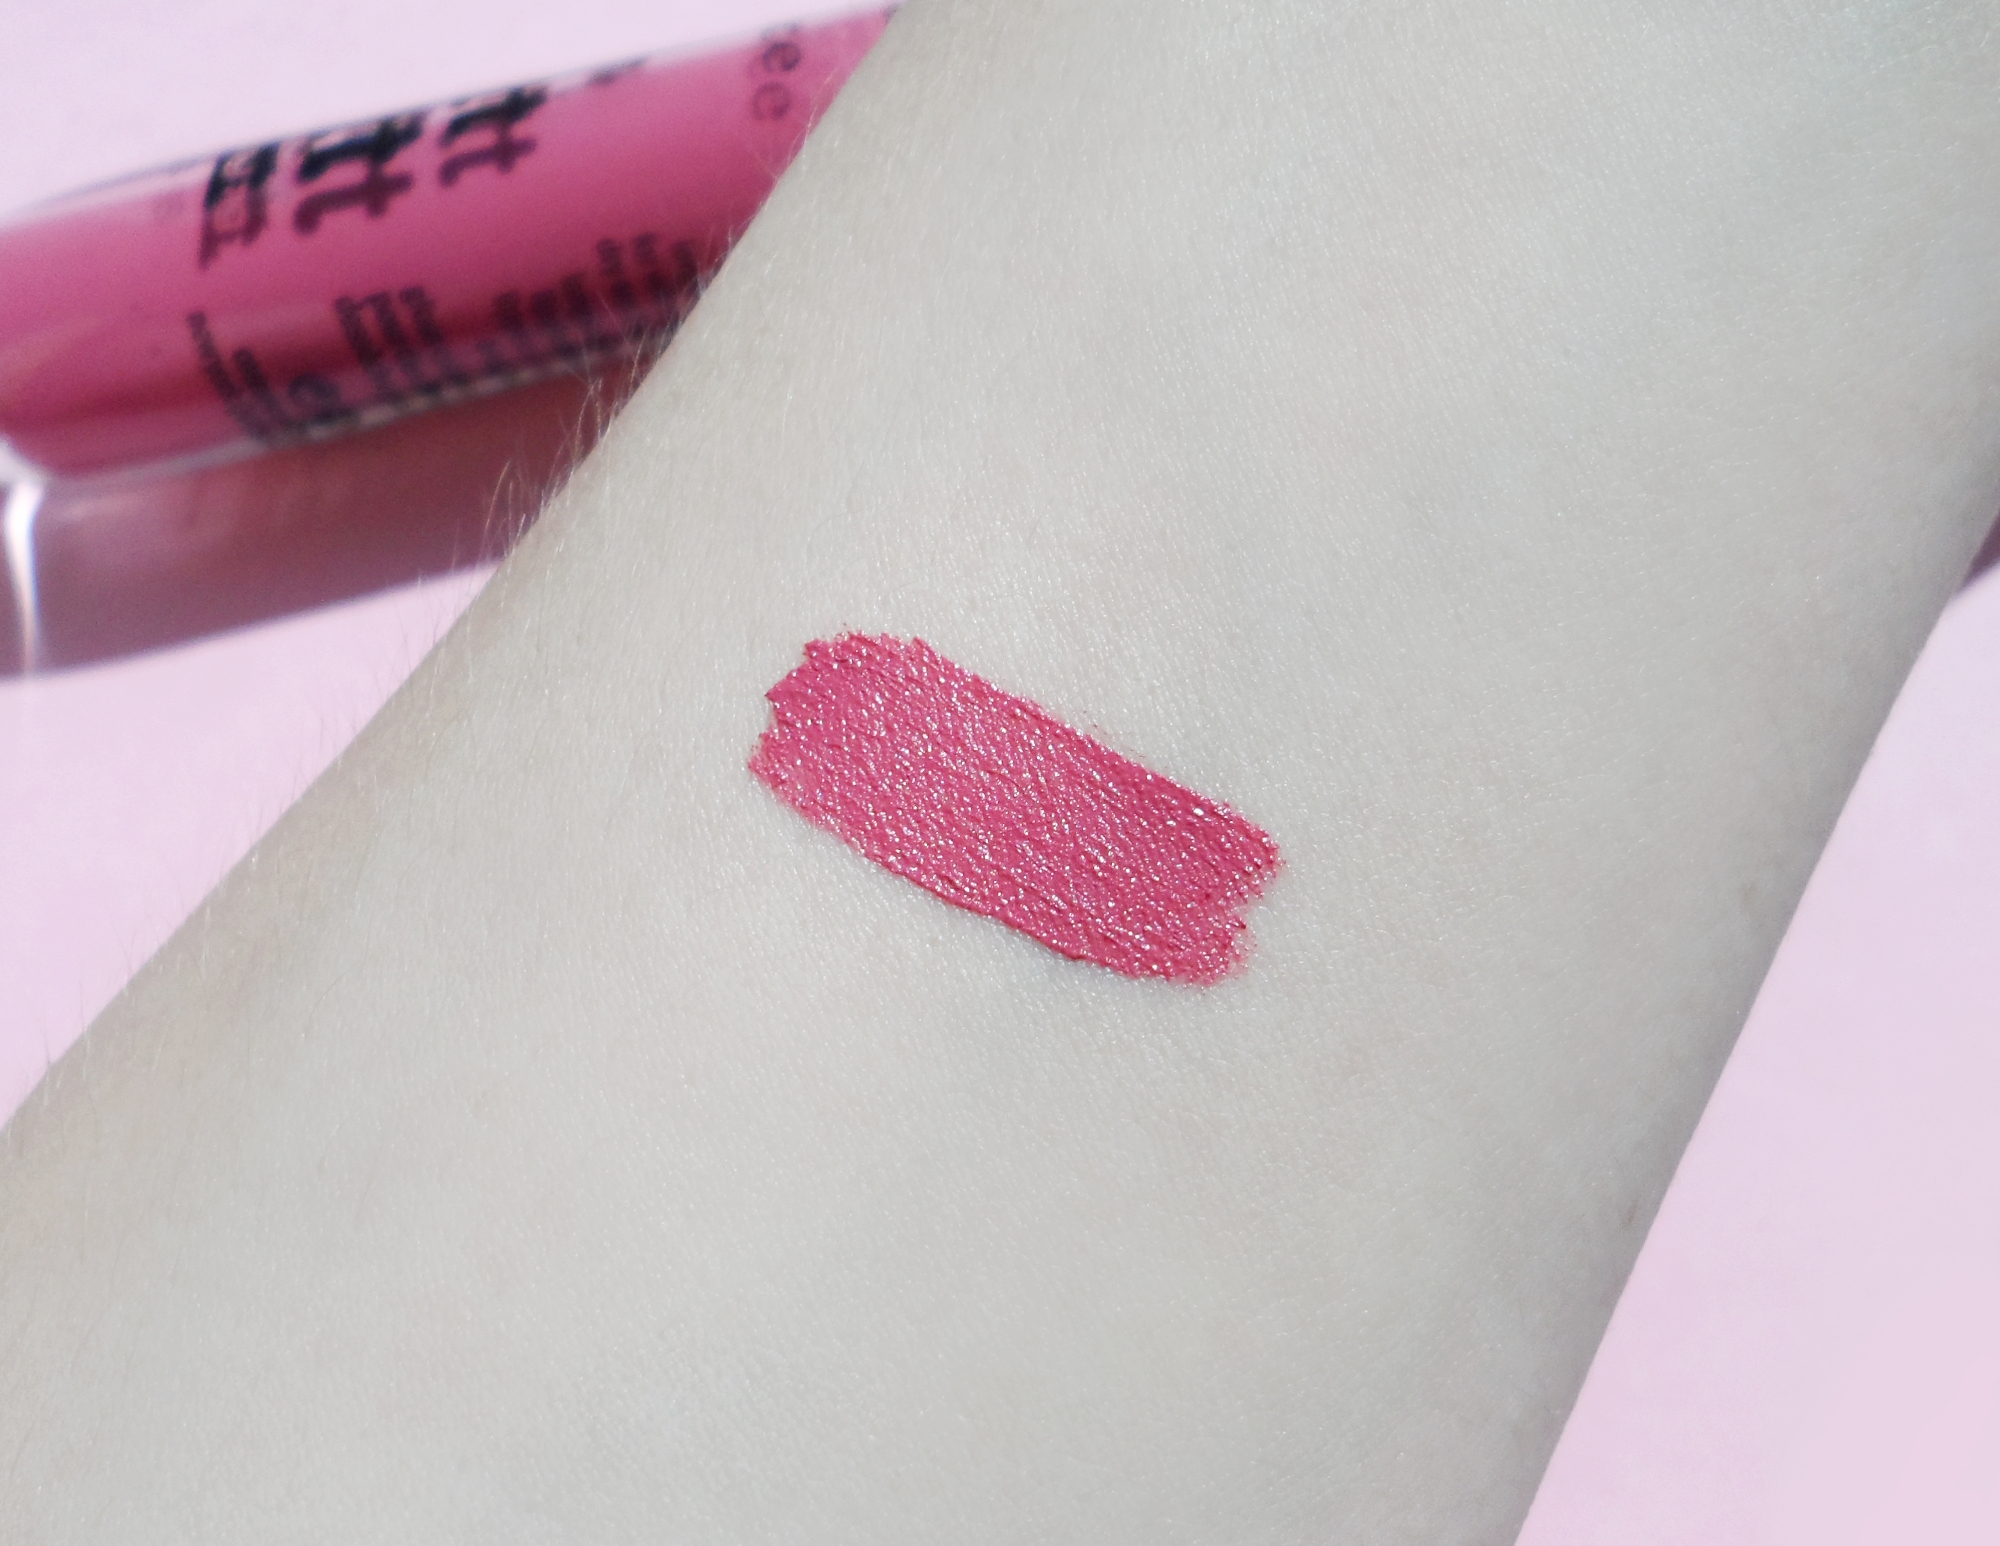 close-up of a light skin with a lipstick swatch on it